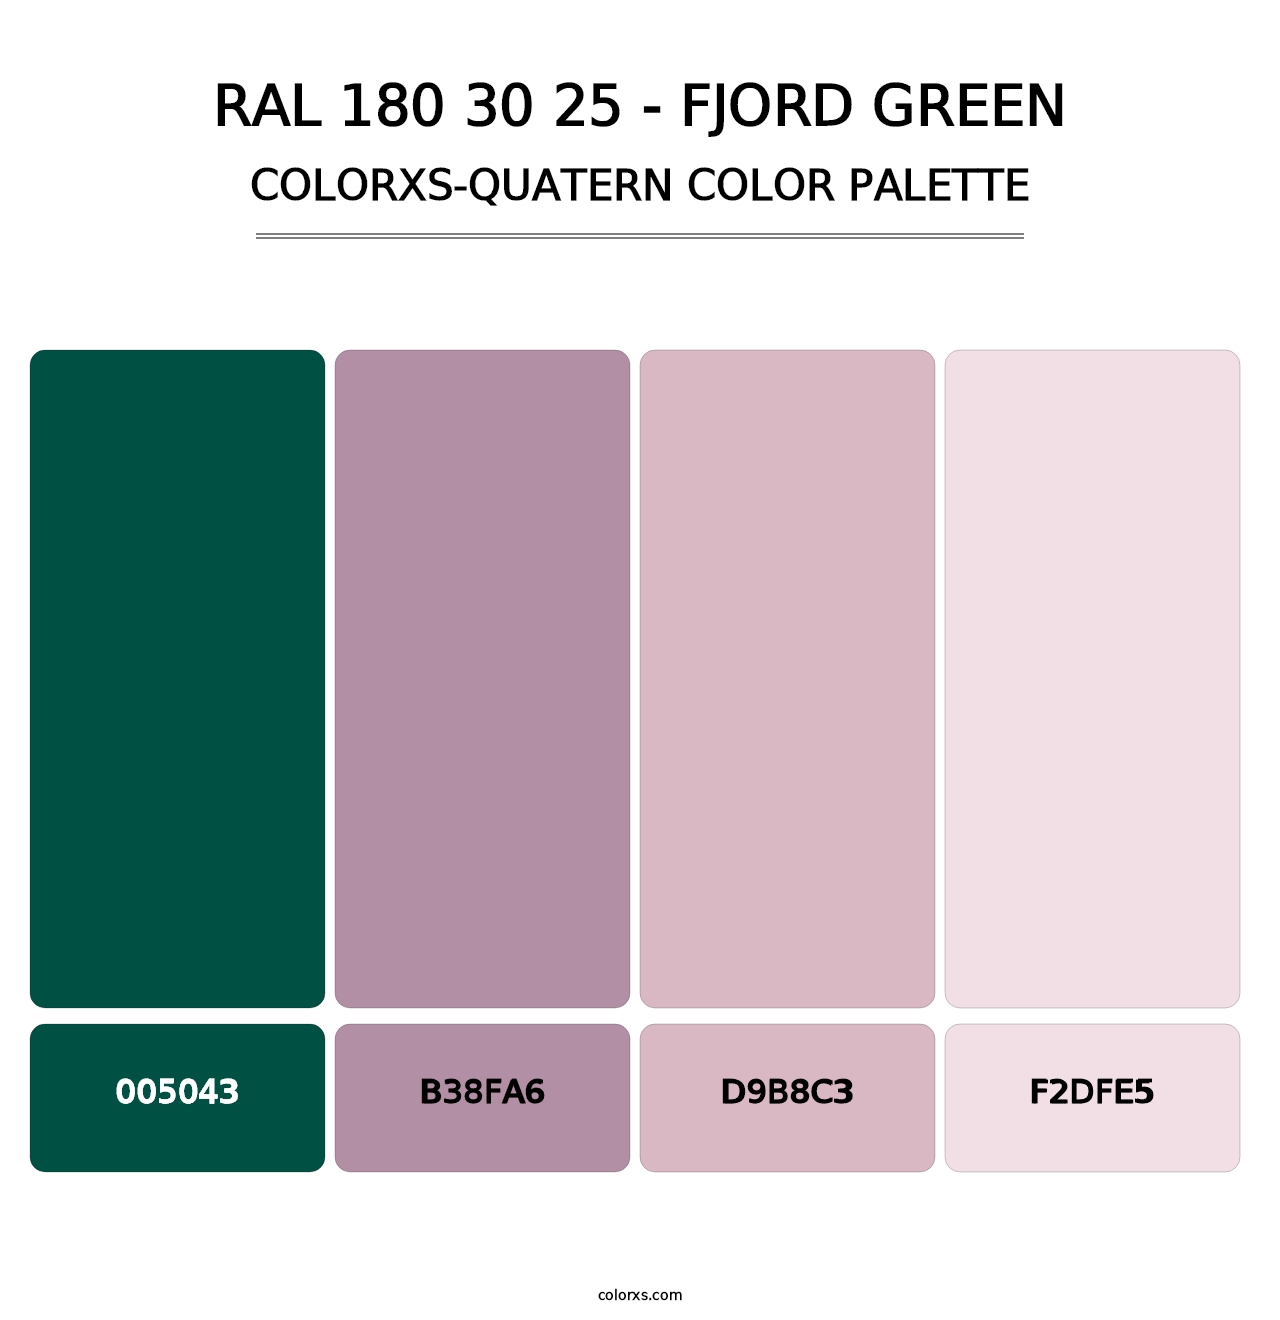 RAL 180 30 25 - Fjord Green - Colorxs Quatern Palette